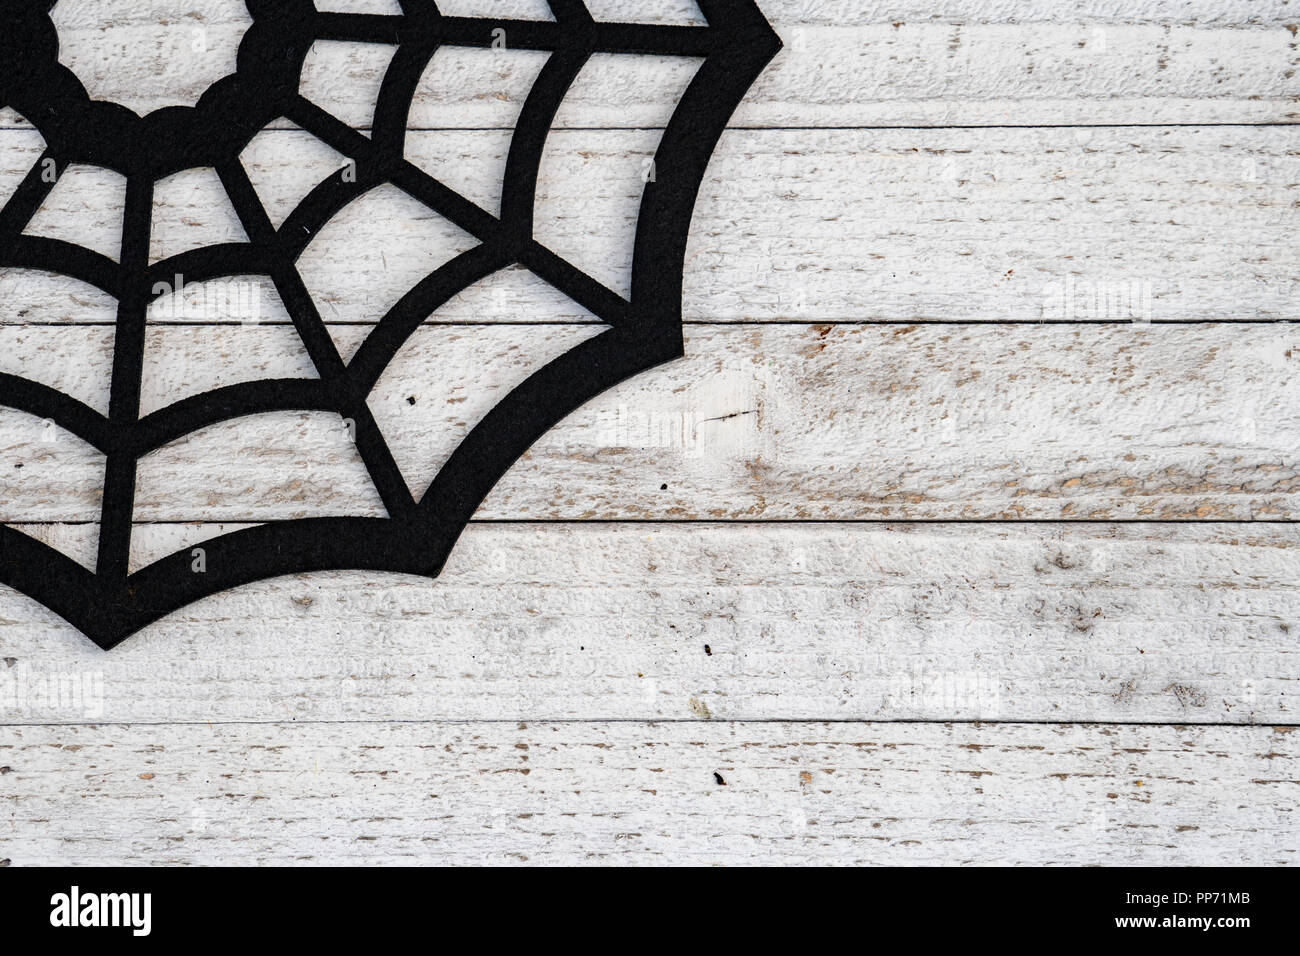 Rustic black spiderweb Halloween background concept on wood background. Copy space available Stock Photo